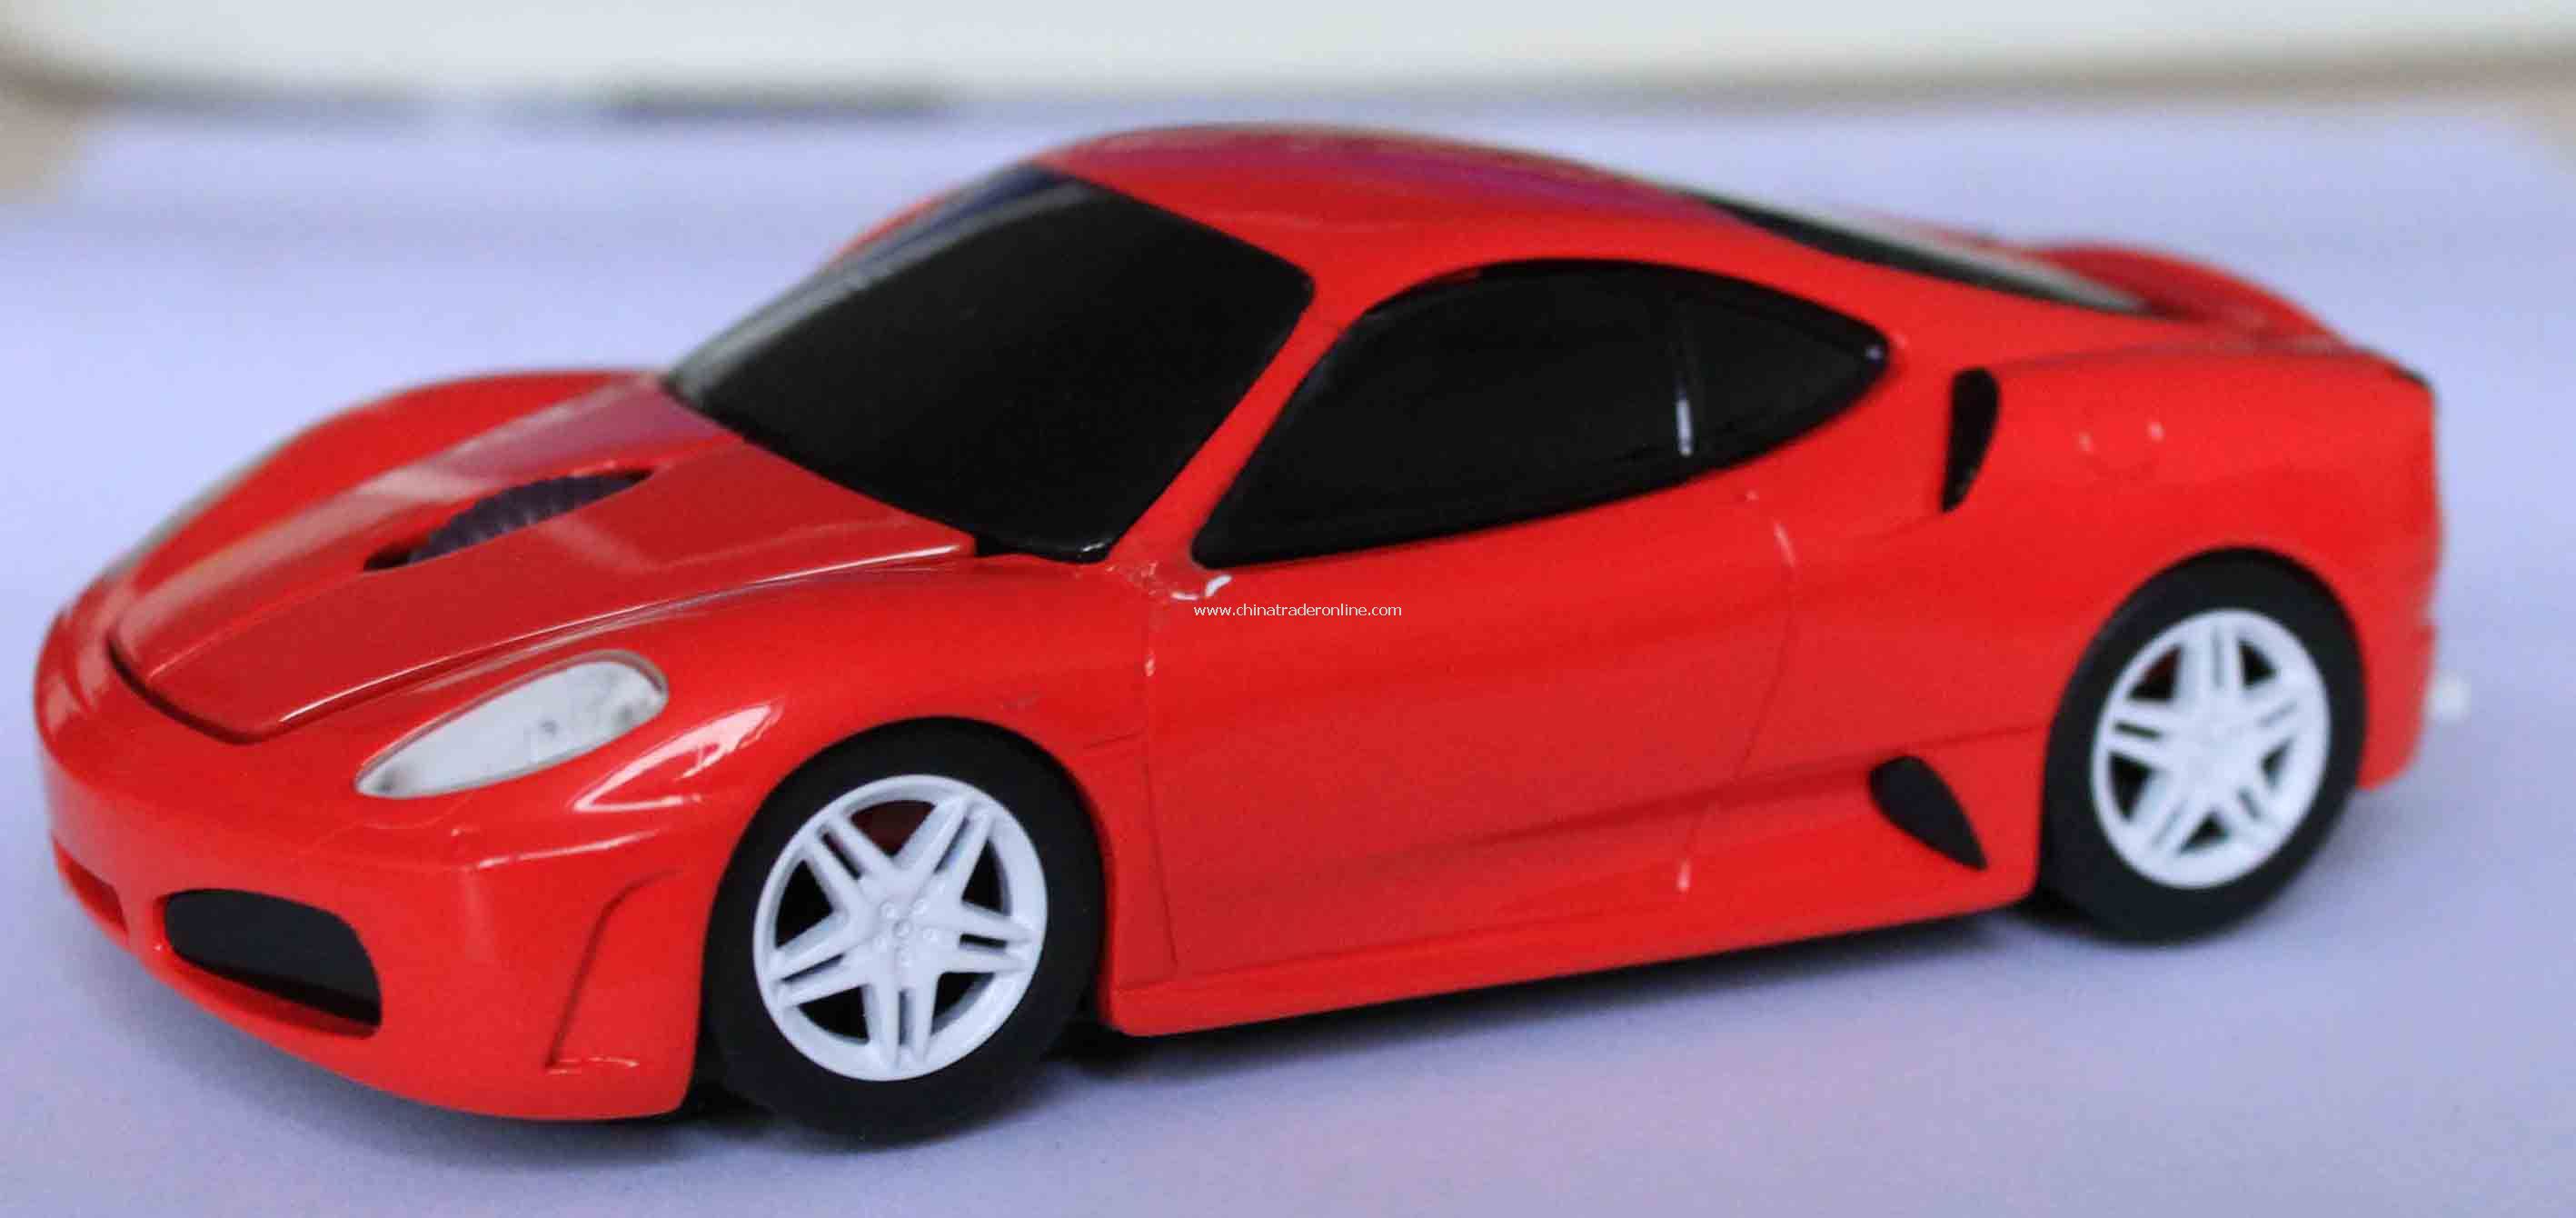 Sports Car Mouse from China